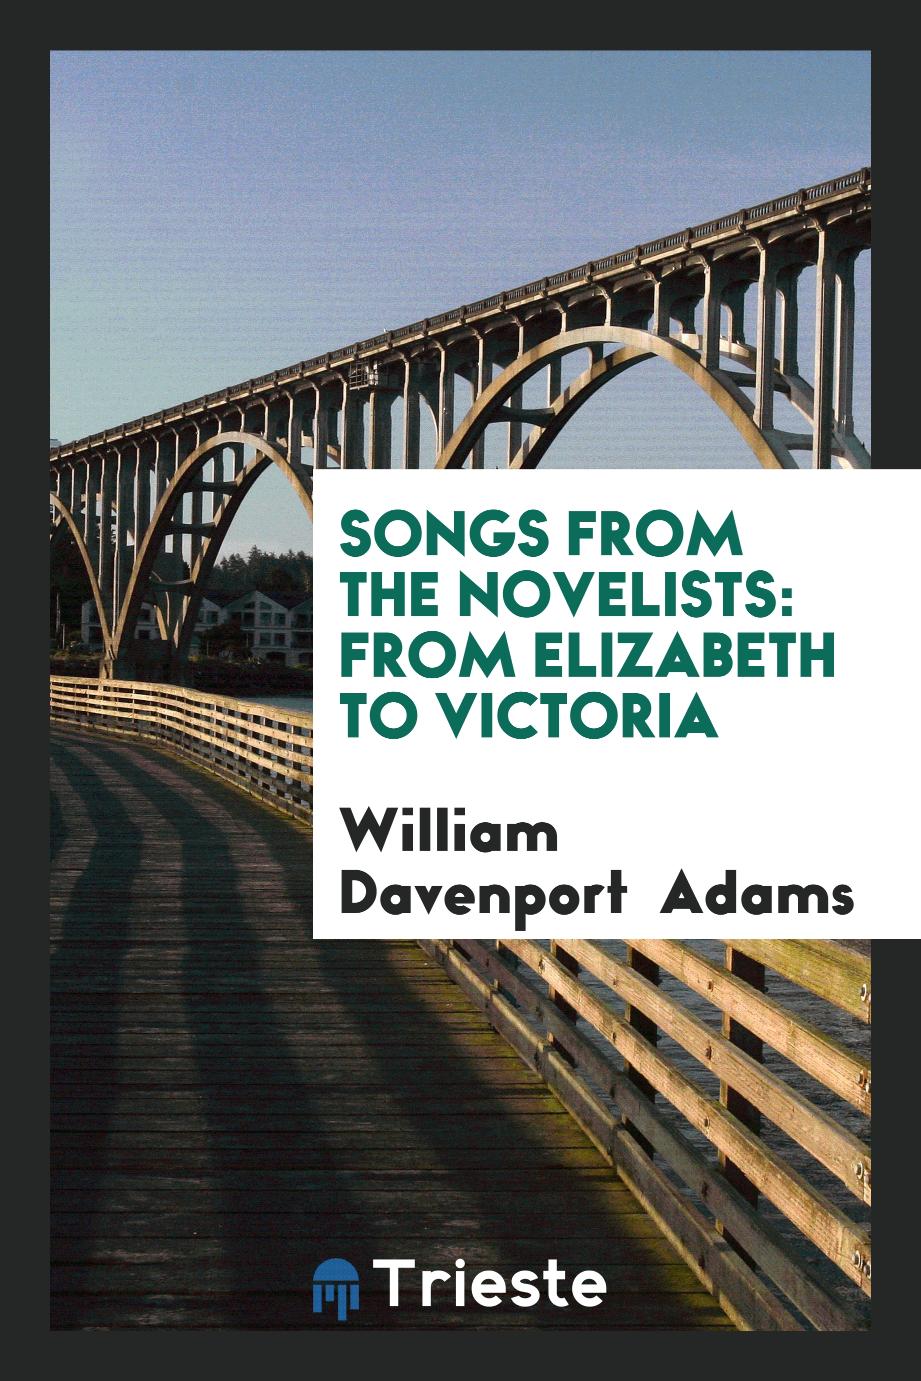 Songs from the Novelists: From Elizabeth to Victoria